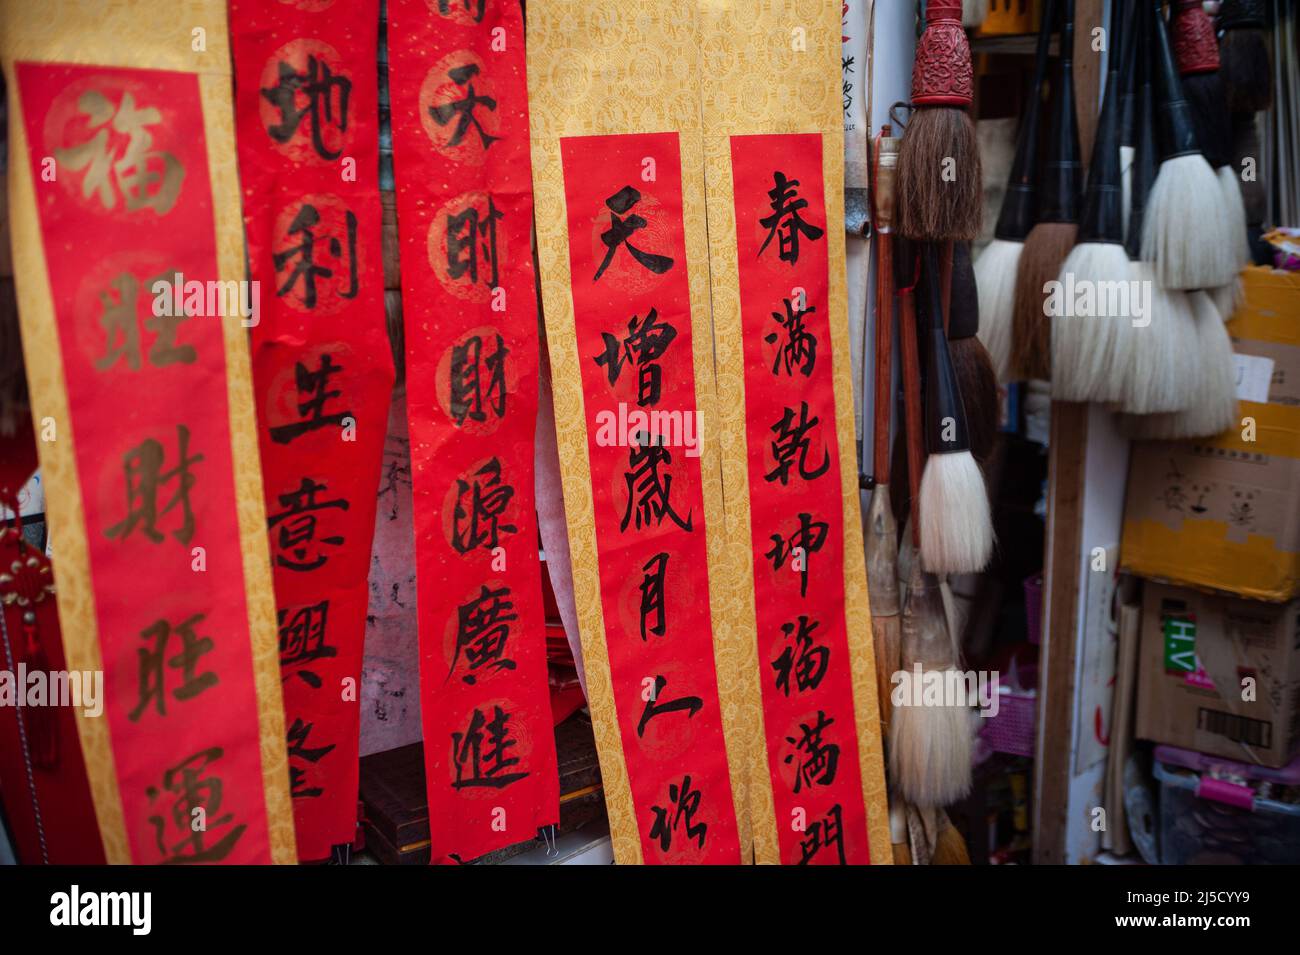 Jan. 29, 2021, Singapore, Republic of Singapore, Asia - Speech banners with calligraphy and Chinese characters, as well as ink brushes, are offered for sale at a street bazaar in the city's Chinatown district on the occasion of the upcoming Chinese New Year, which is in the Chinese zodiac sign of the ox. Due to the ongoing Corona pandemic, official celebrations will be curtailed this year. [automated translation] Stock Photo